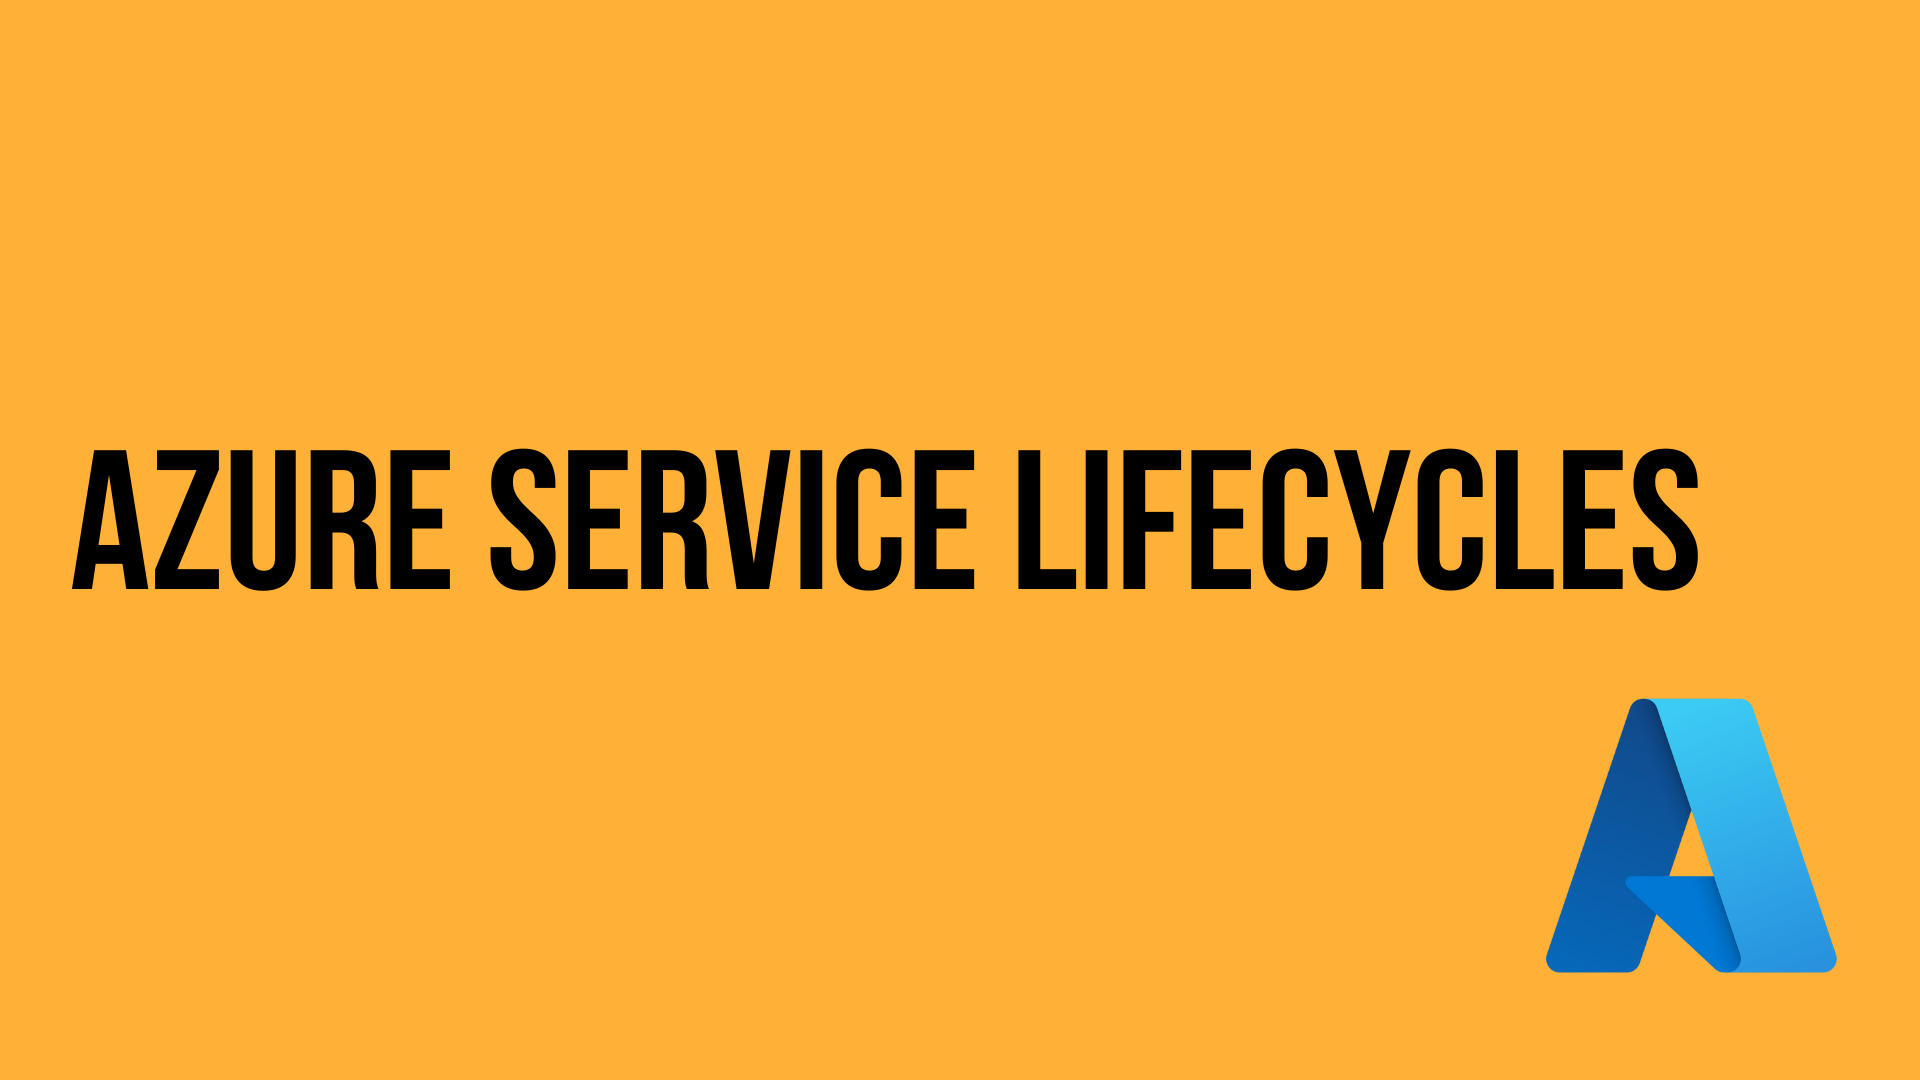 Azure Service Lifecycles